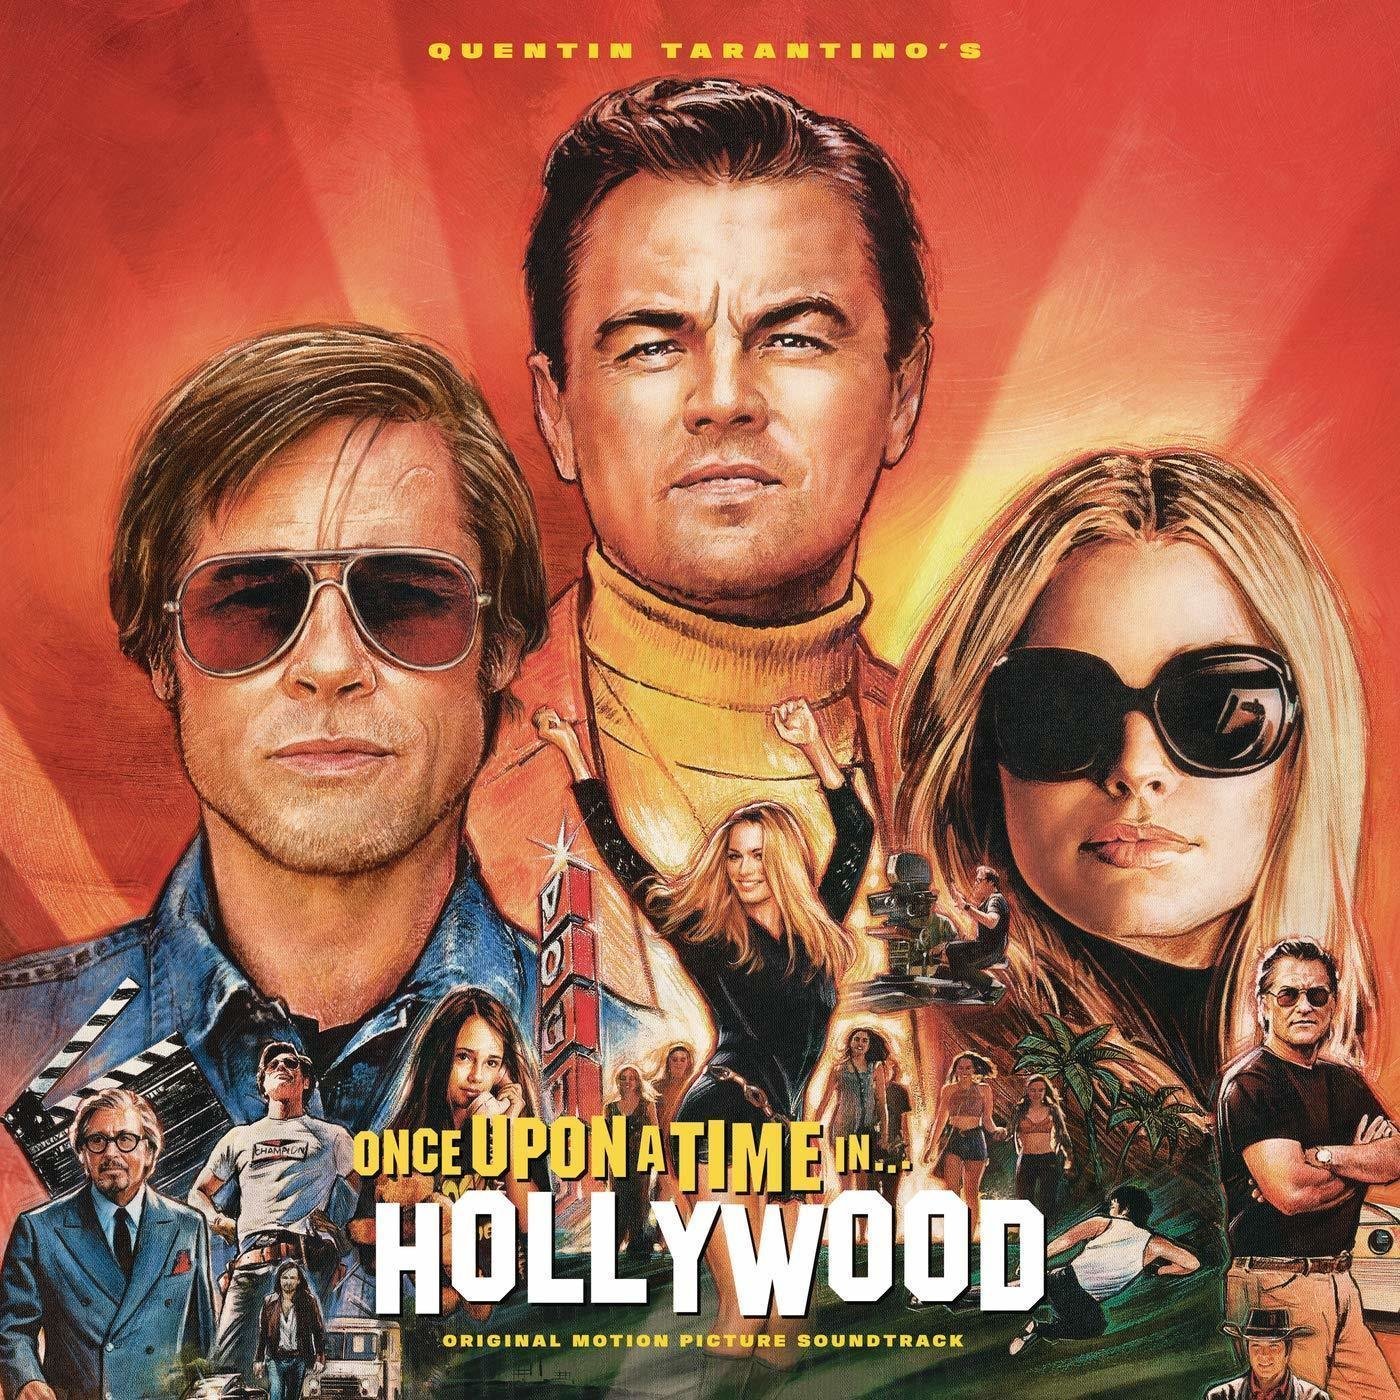 Vinyl Record Quentin Tarantino - Once Upon a Time In Hollywood OST (Orange Coloured) (2 LP)